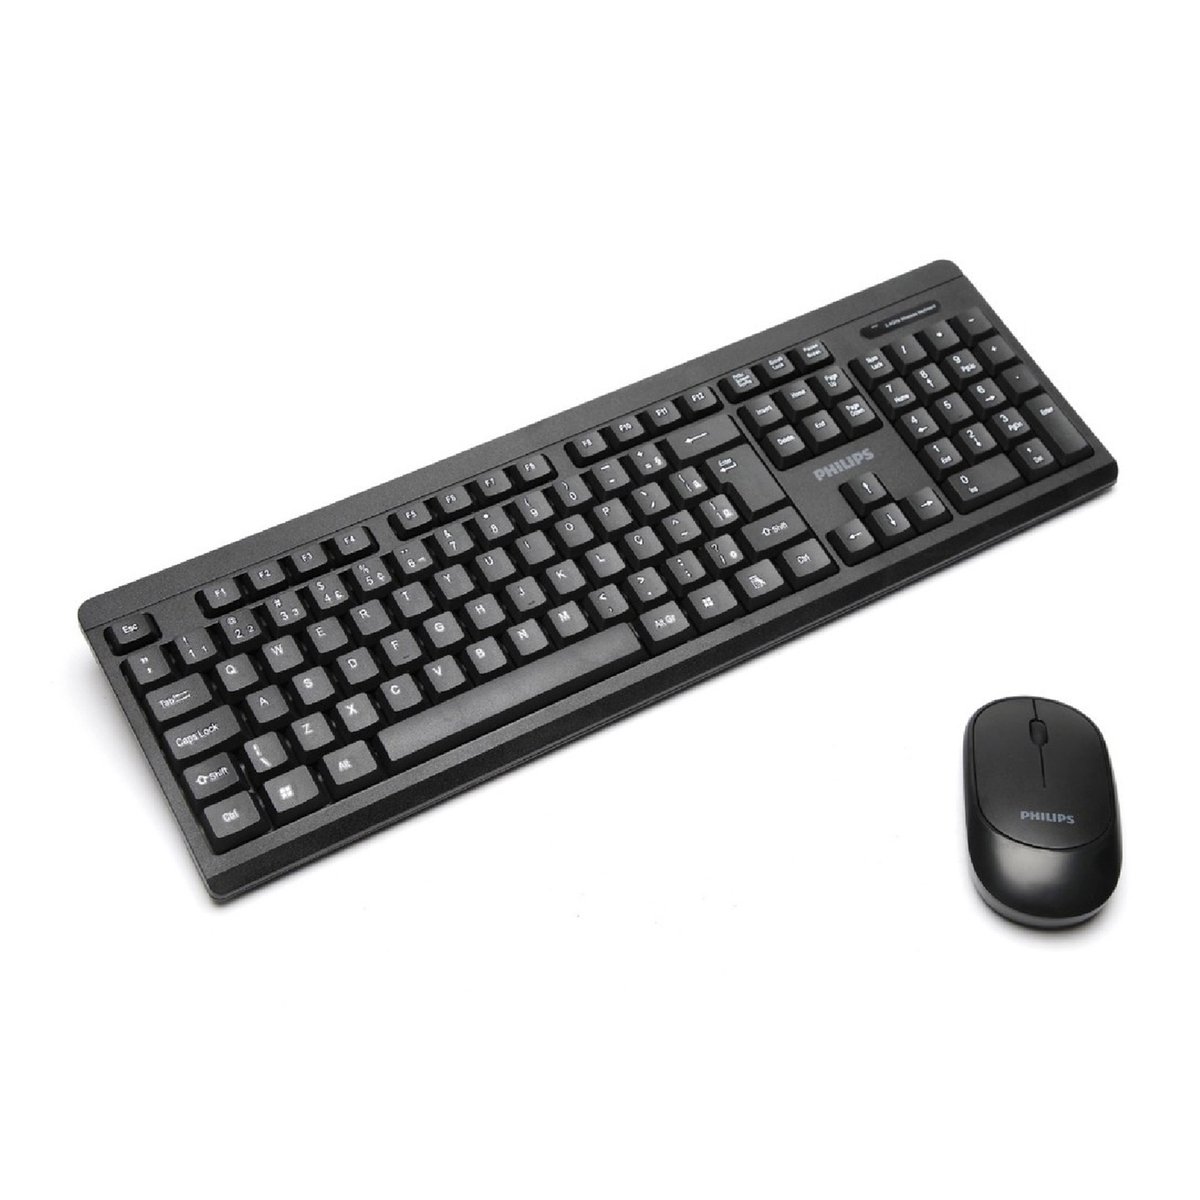 Philips 2.4GHz Wireless Keyboard Mouse Combo with Optical Sensor, Black